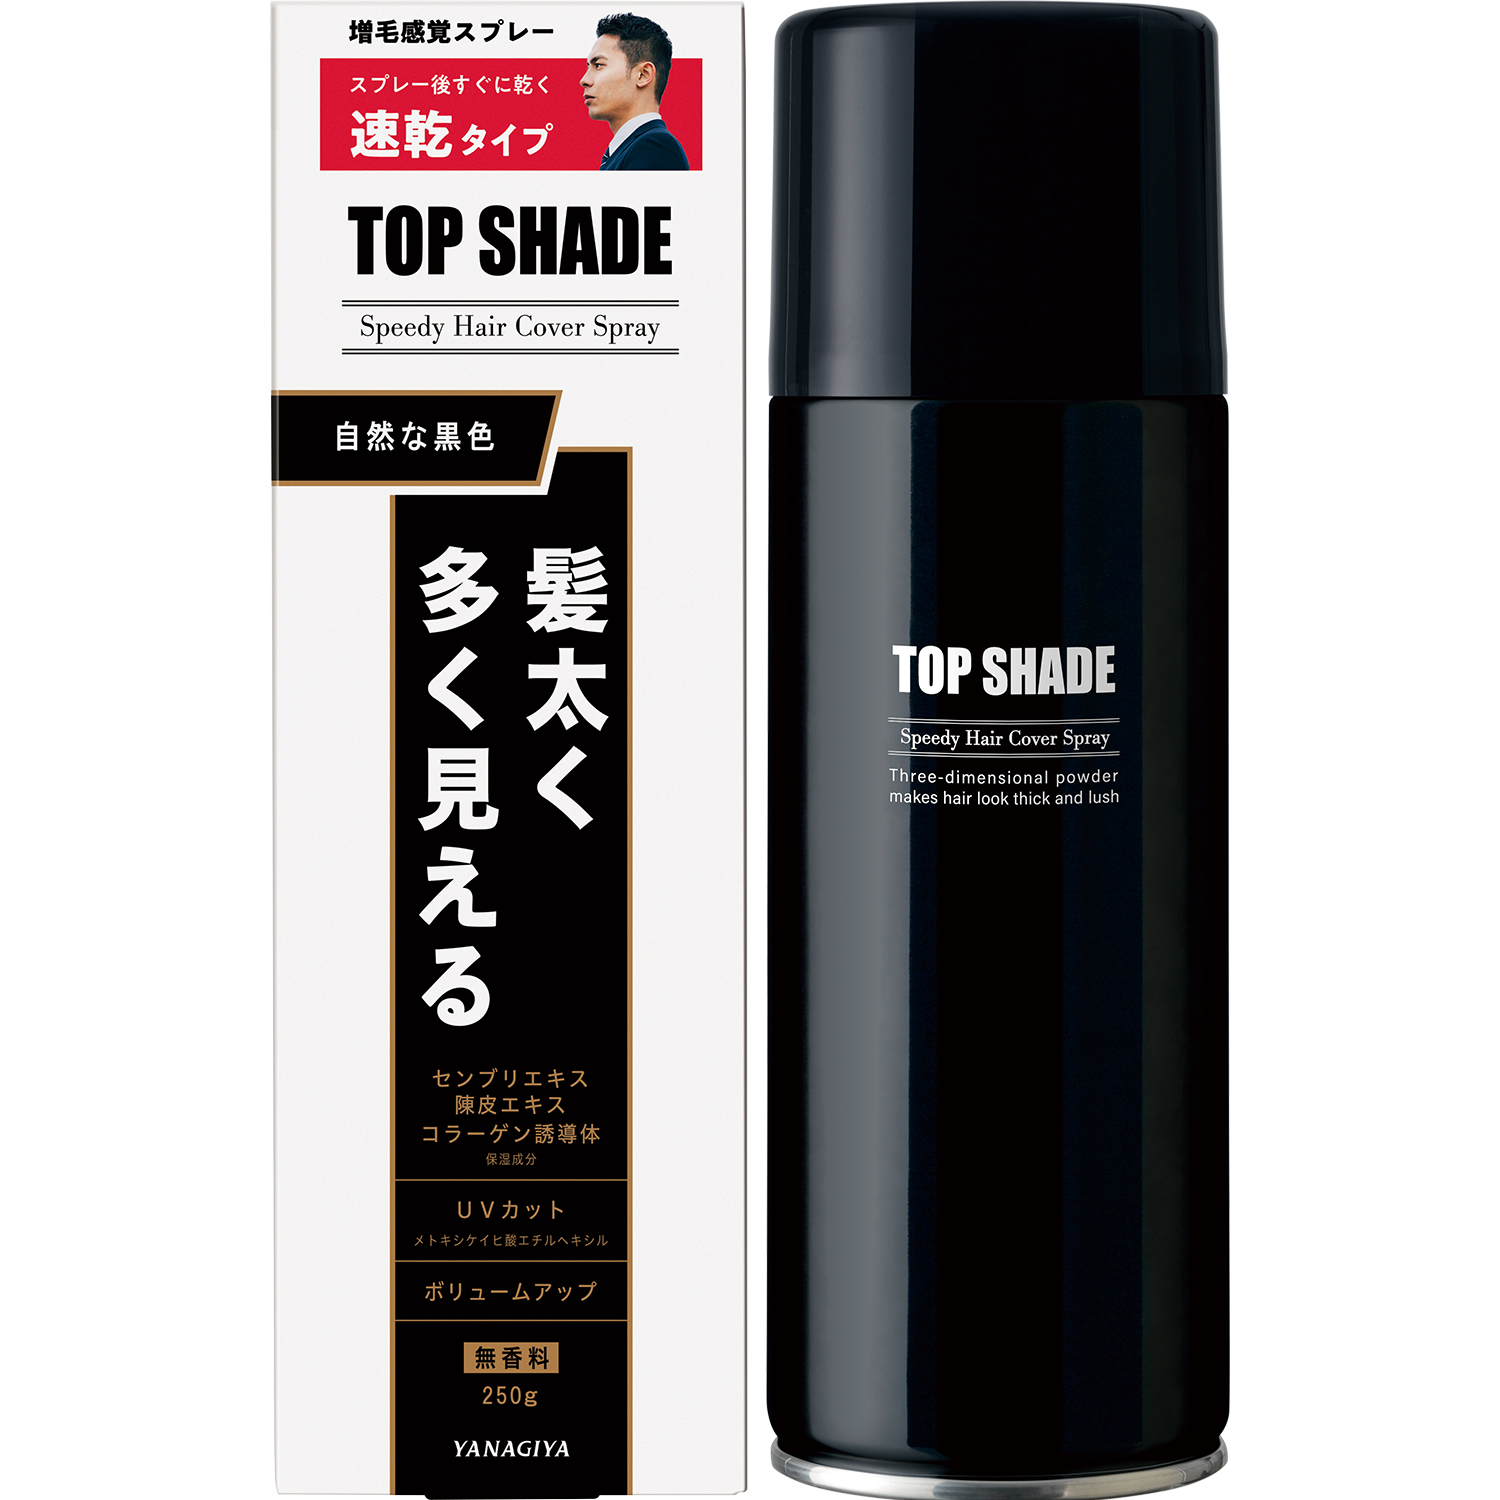 Top Shade Speedy Hair Cover Spray  Large <Natural Black>